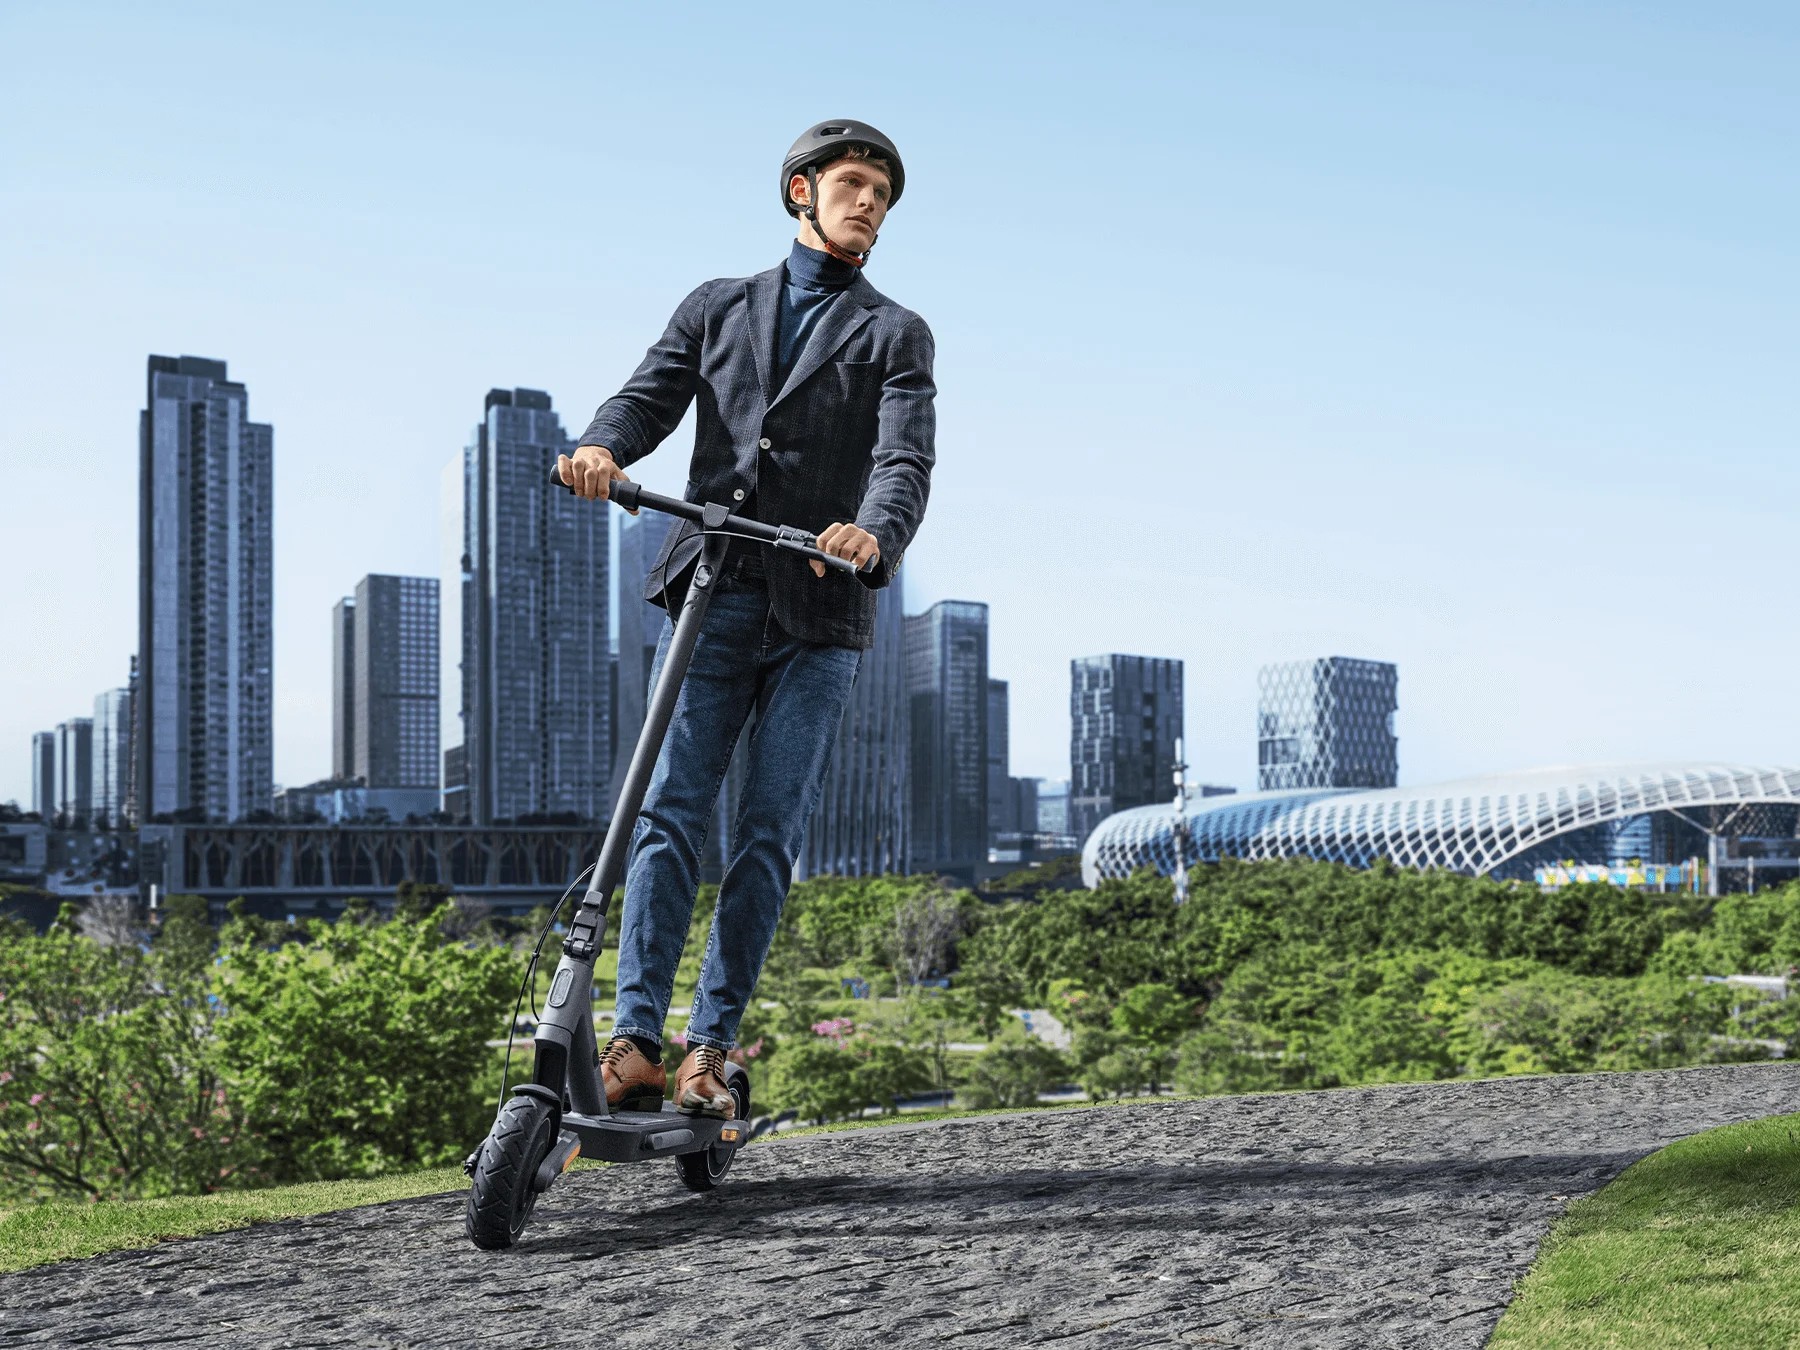 Xiaomi Electric Scooter 4 Go with 450W motor and 18km range officially  unveiled - Gizmochina